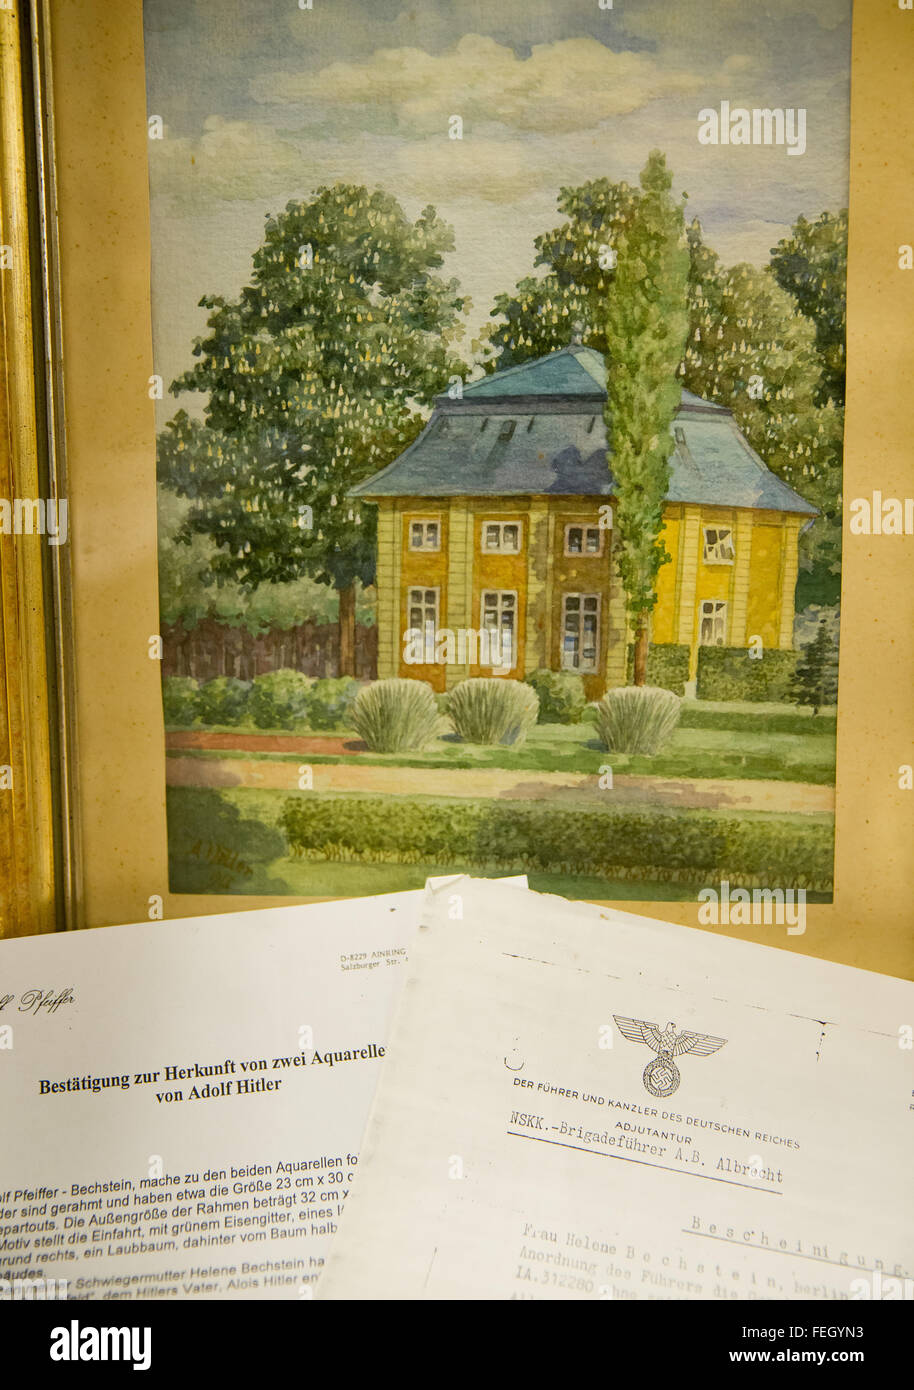 Nuremberg, Germany. 4th Feb, 2016. The water colour painting 'Wohnhaus von Dr. Bloch' from 1913, which is attributed to Adolf Hitler as author, is presented at an auctioneer in Nuremberg, Germany, 4 February 2016. A total of 29 paintings and drawings, attributed to Adolf Hitler, have been auctioned off at Weidler actioneers in Nuremberg on 6 February 2016. Photo: Daniel Karmann/dpa/Alamy Live News Stock Photo